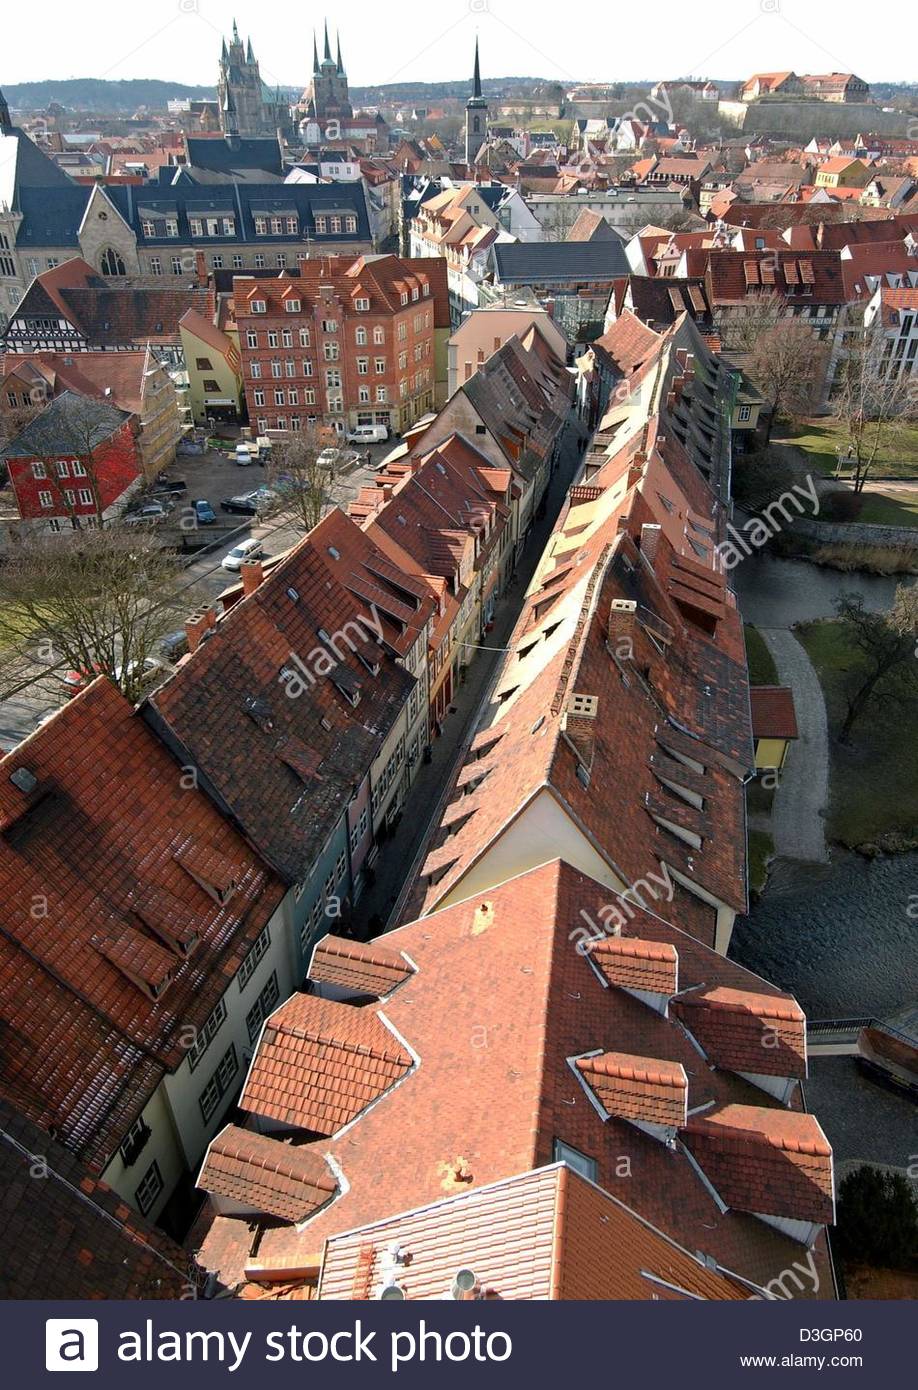 dpa an attractive few across the rooftops of the old town of erfurt D3GP60